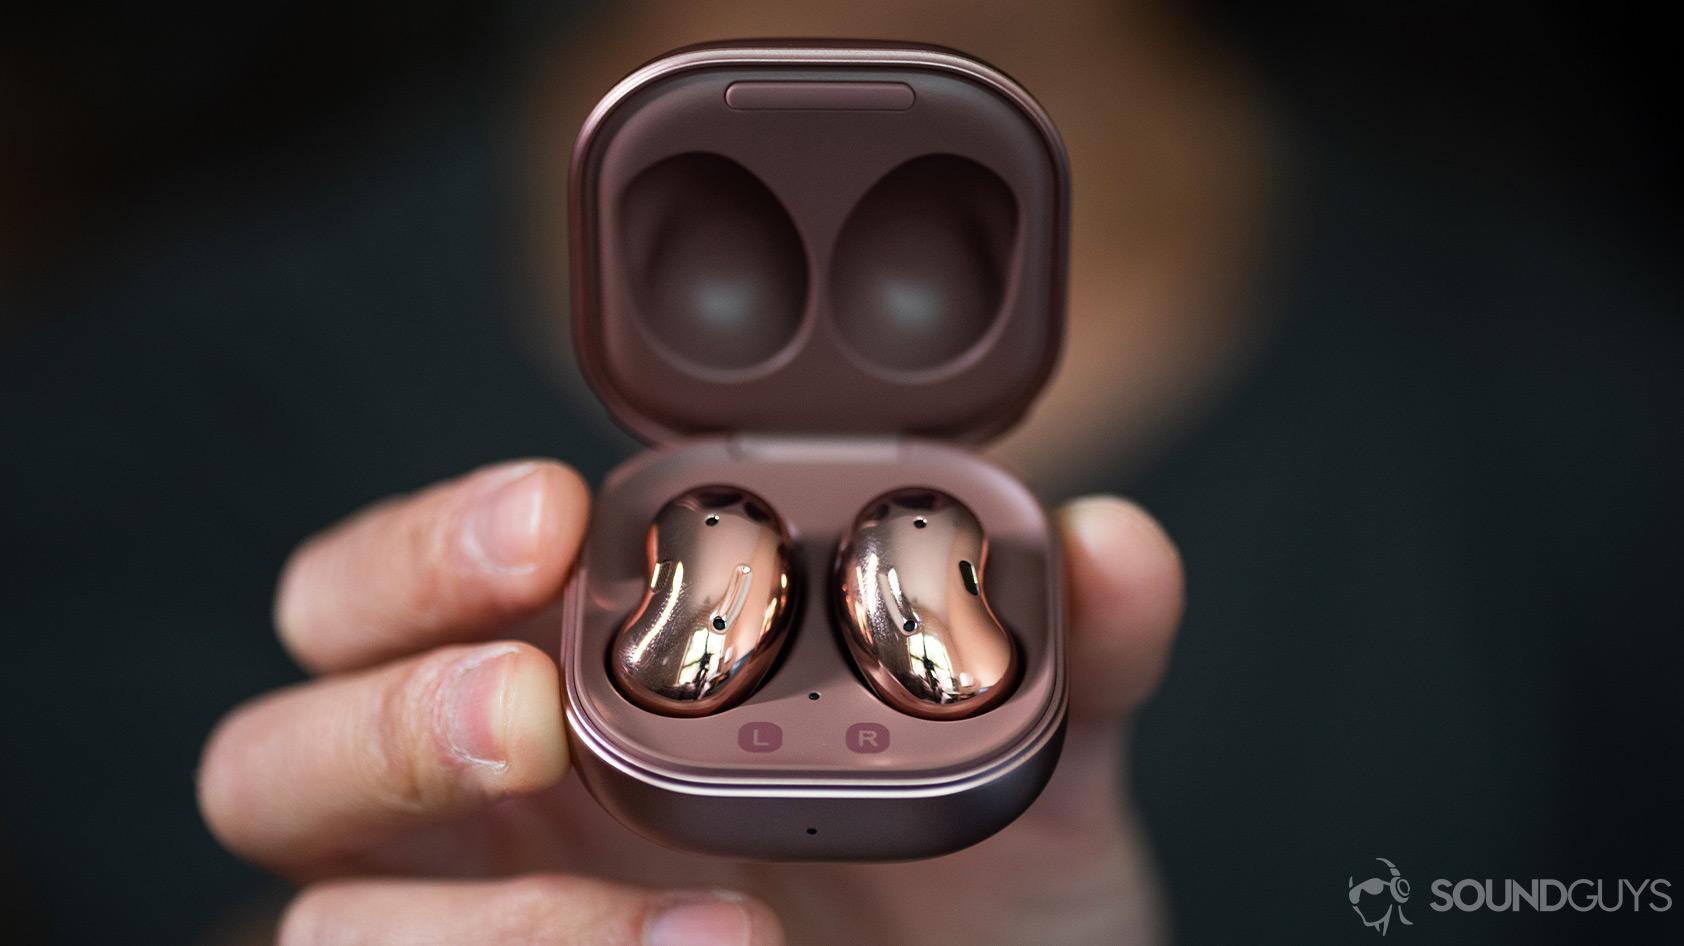 Samsung Galaxy Buds Live review: great fit, good sound